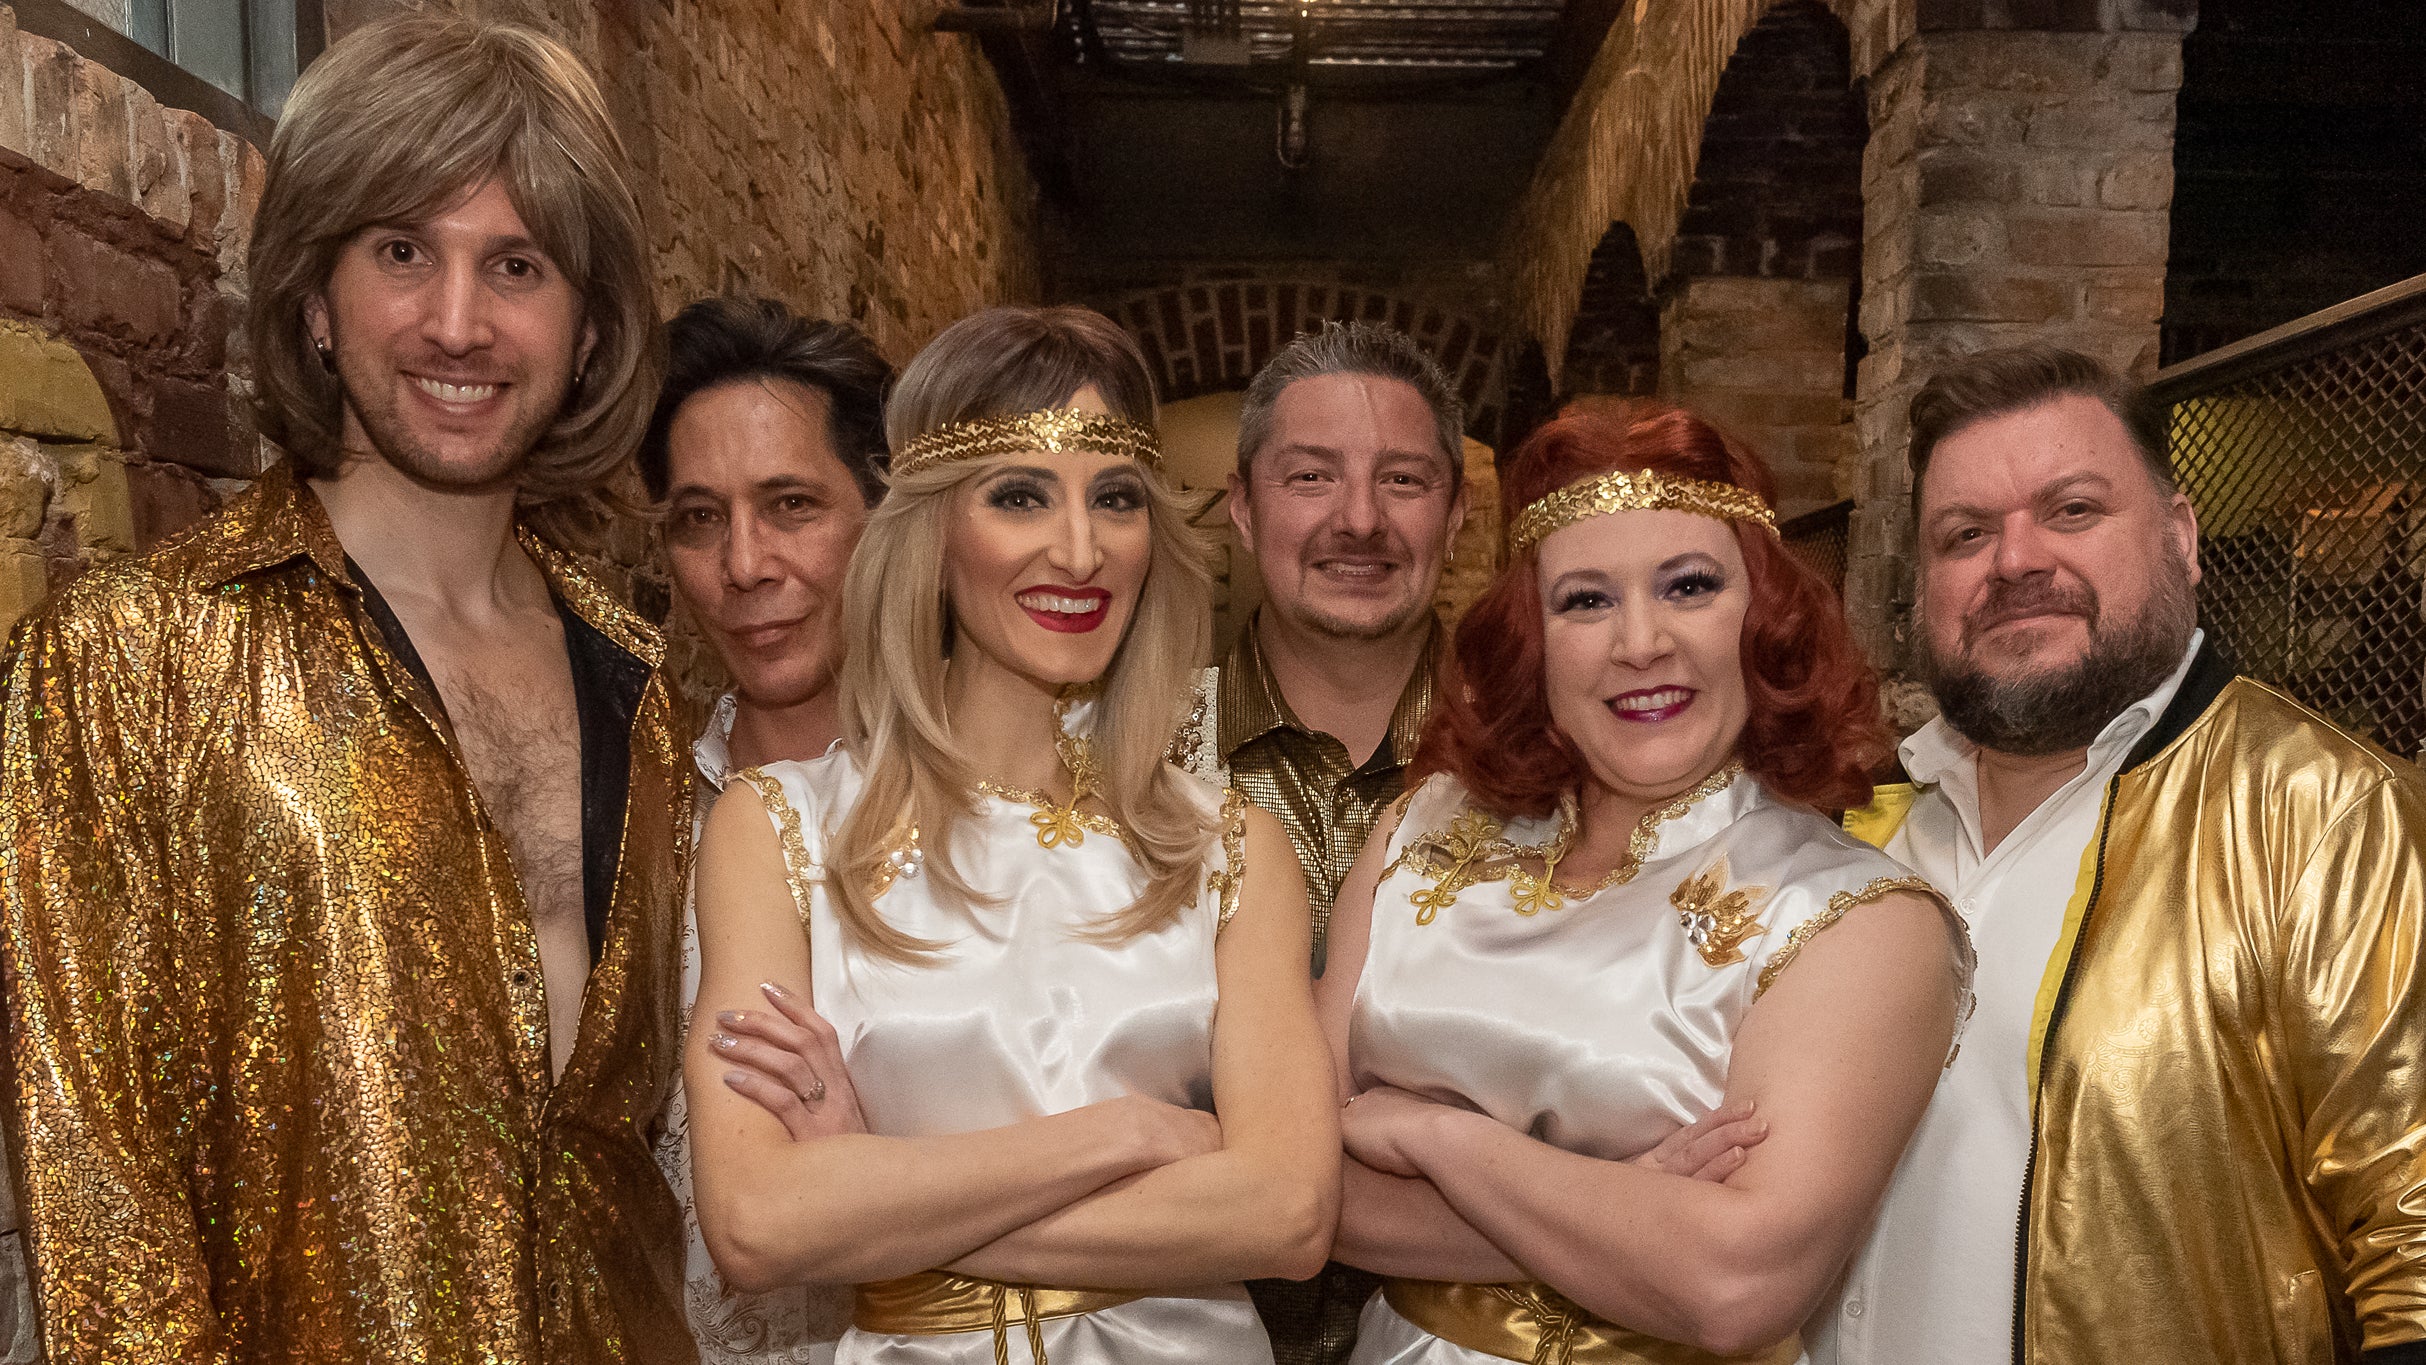 Dancing Queen: A Tribute to Abba in Niagara Falls promo photo for Official Platinum Onsale presale offer code